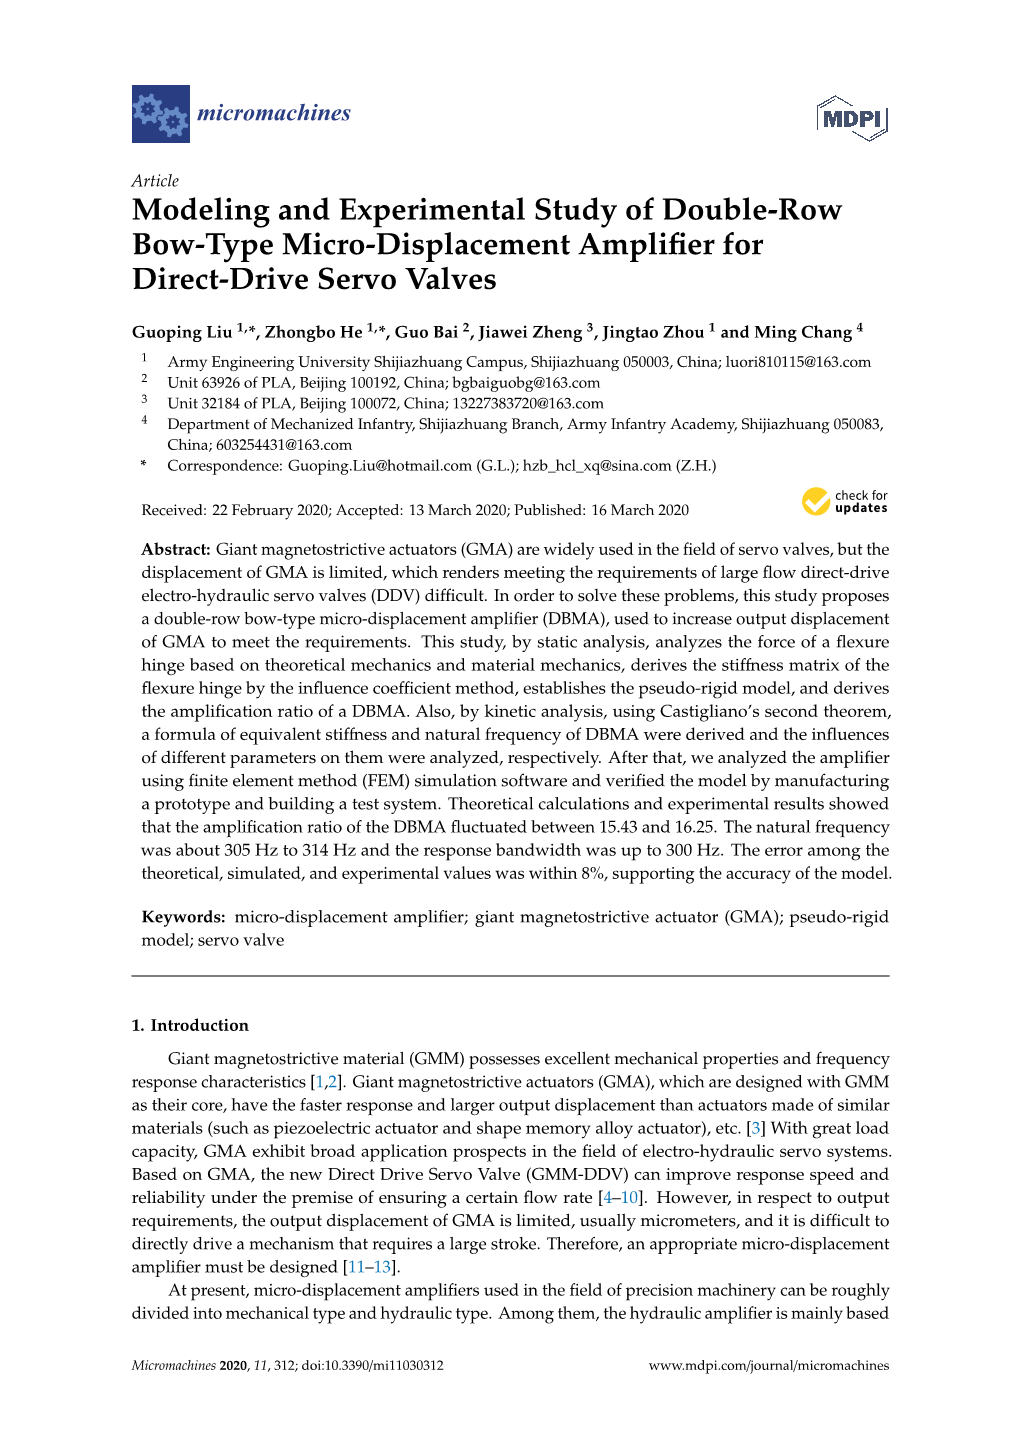 Modeling and Experimental Study of Double-Row Bow-Type Micro-Displacement Ampliﬁer for Direct-Drive Servo Valves